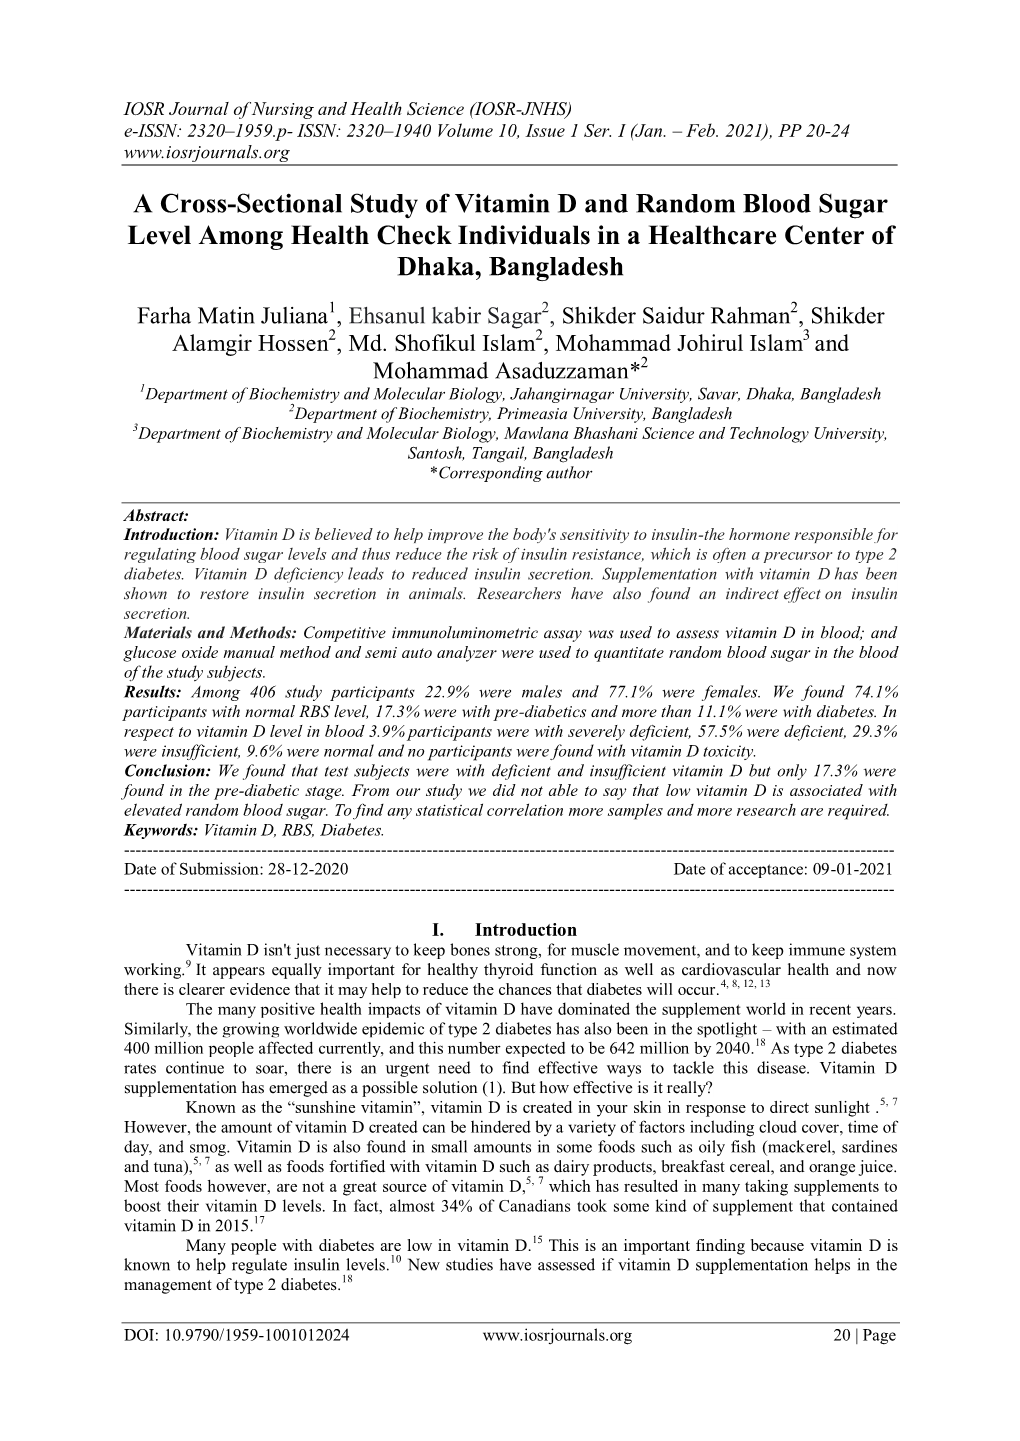 A Cross-Sectional Study of Vitamin D and Random Blood Sugar Level Among Health Check Individuals in a Healthcare Center of Dhaka, Bangladesh